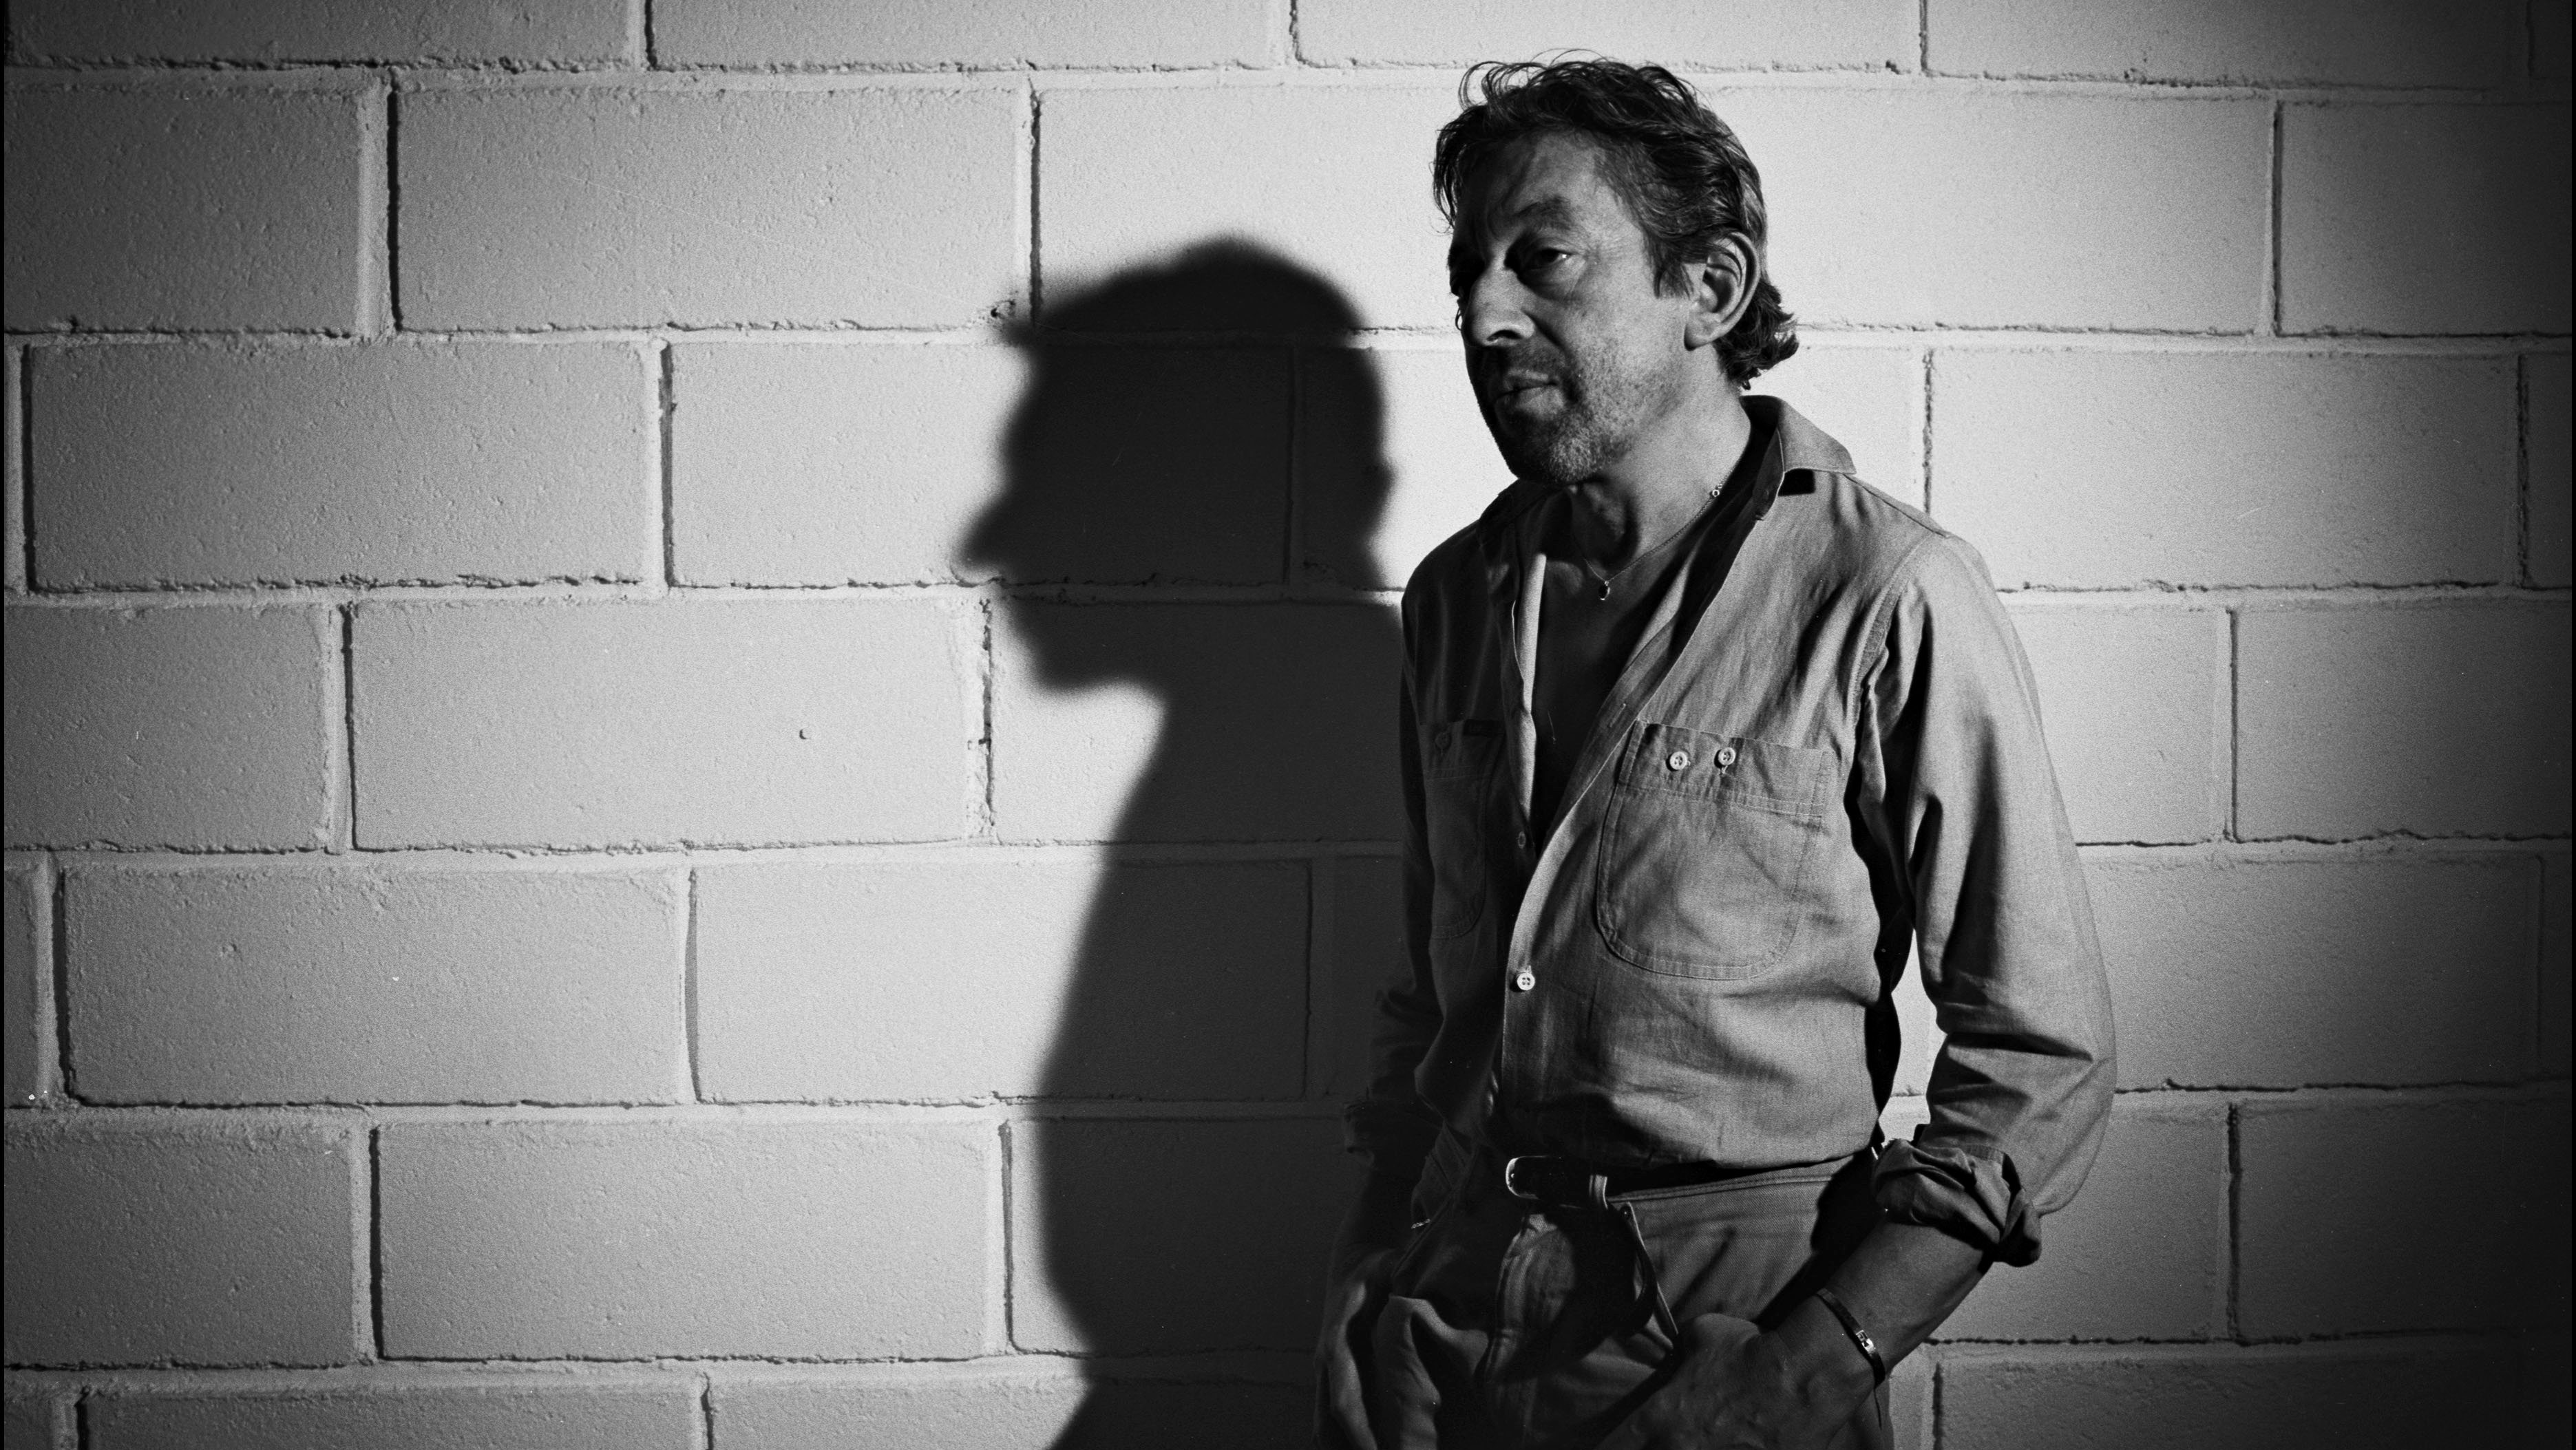 Serge Gainsbourg in France on July 10th, 1985.